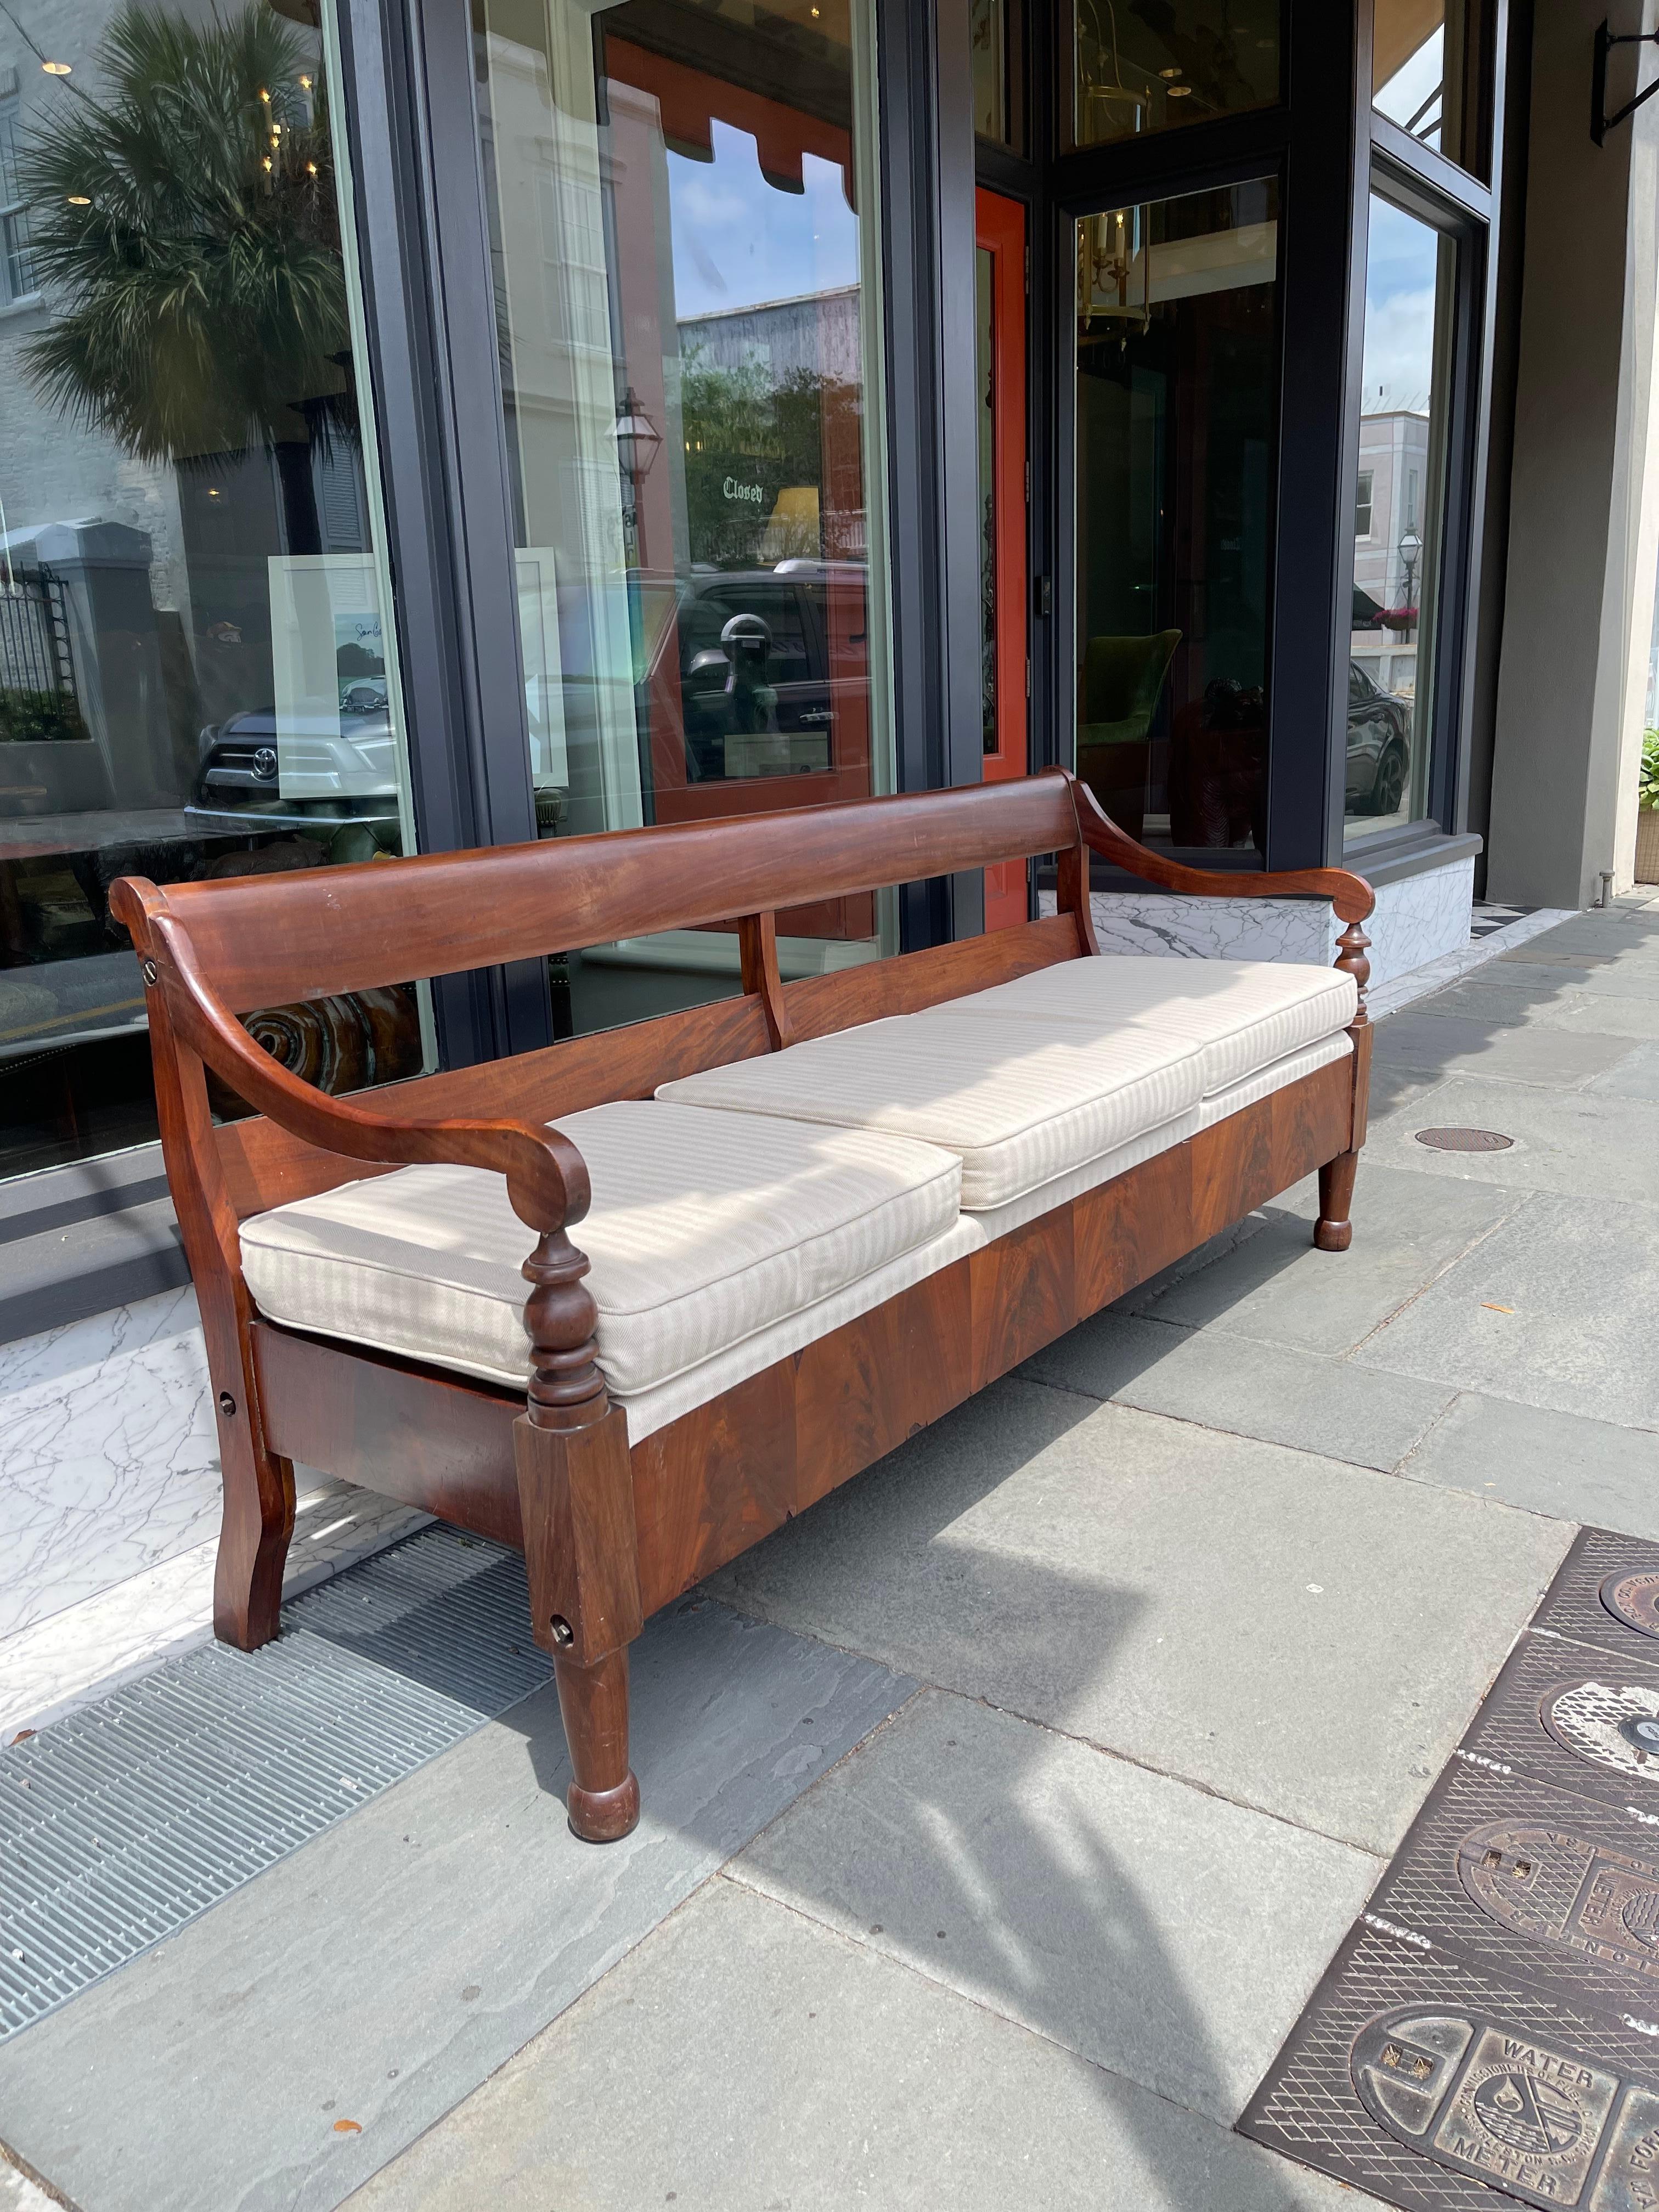 Campaign style sofa or daybed. Easily disassembled to break down for traveling.